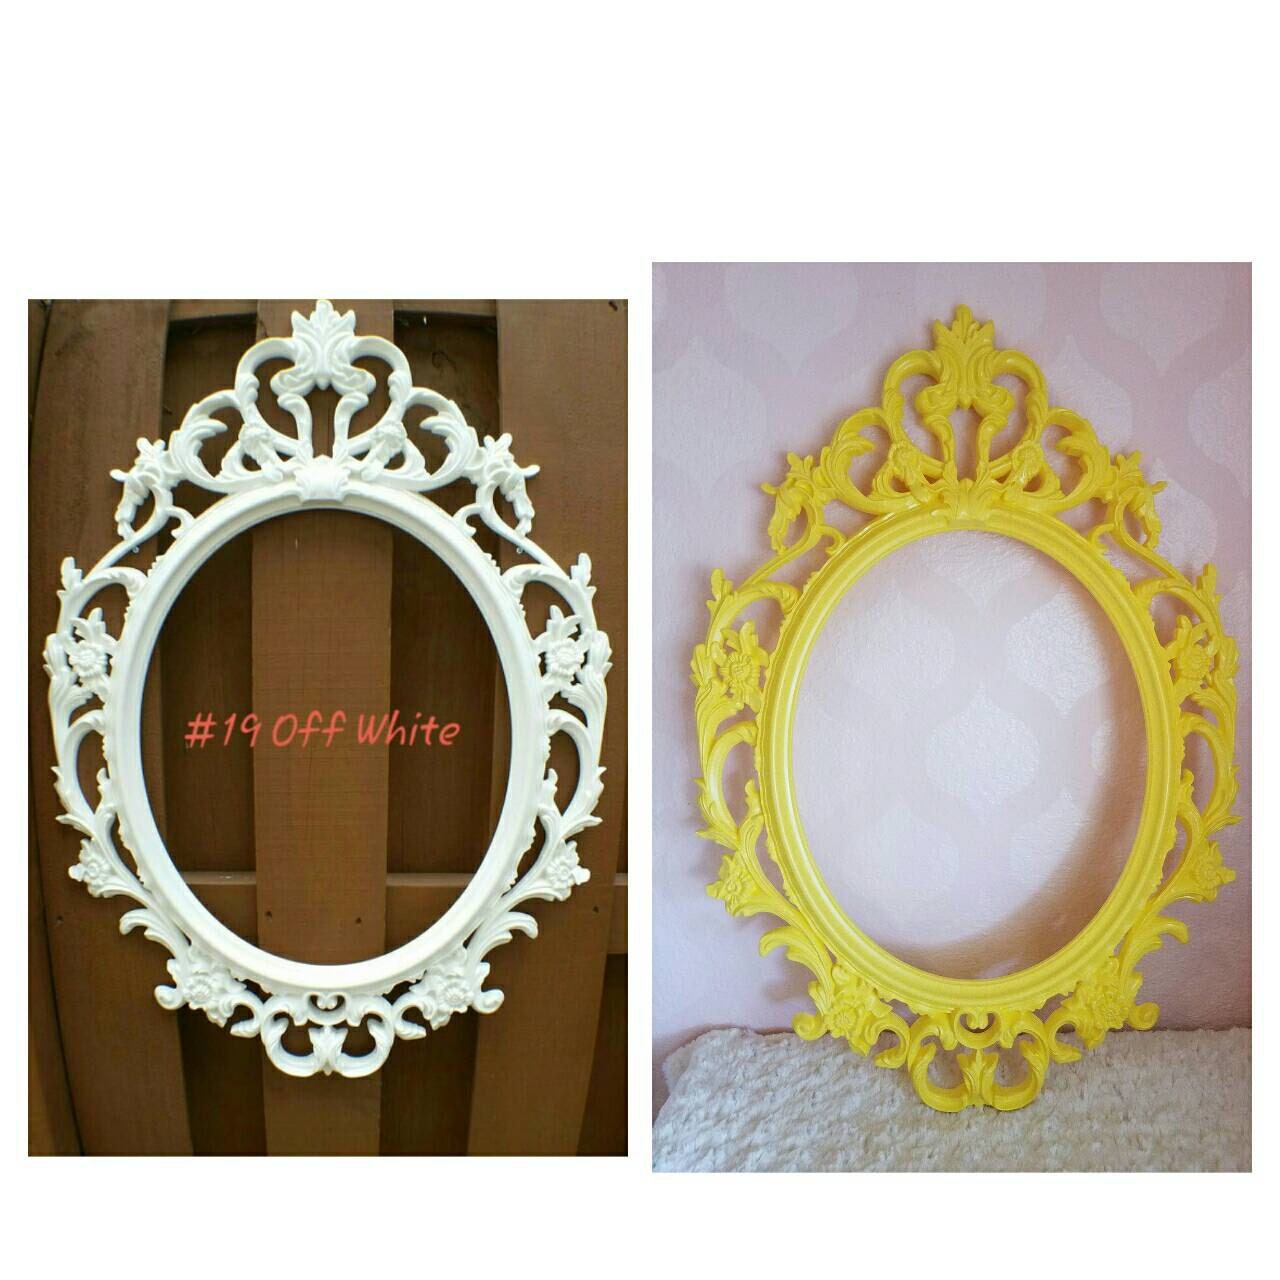 Download Ornate Oval Frame Nursery Wall Decor With Glass / Ornate ...